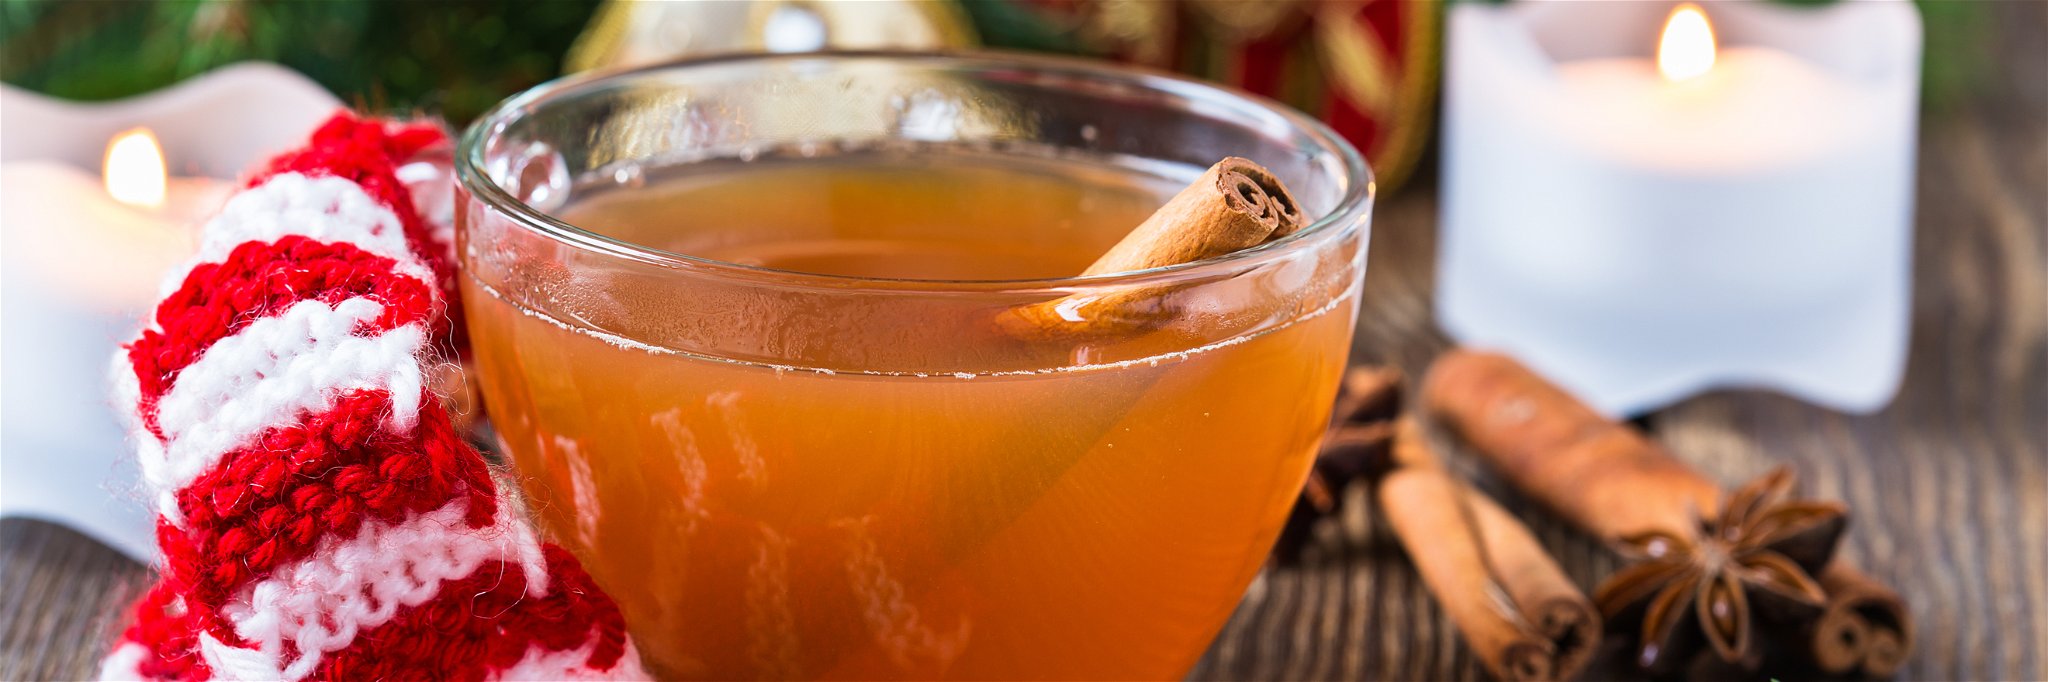 Mulled cider makes a great Christmas drink.